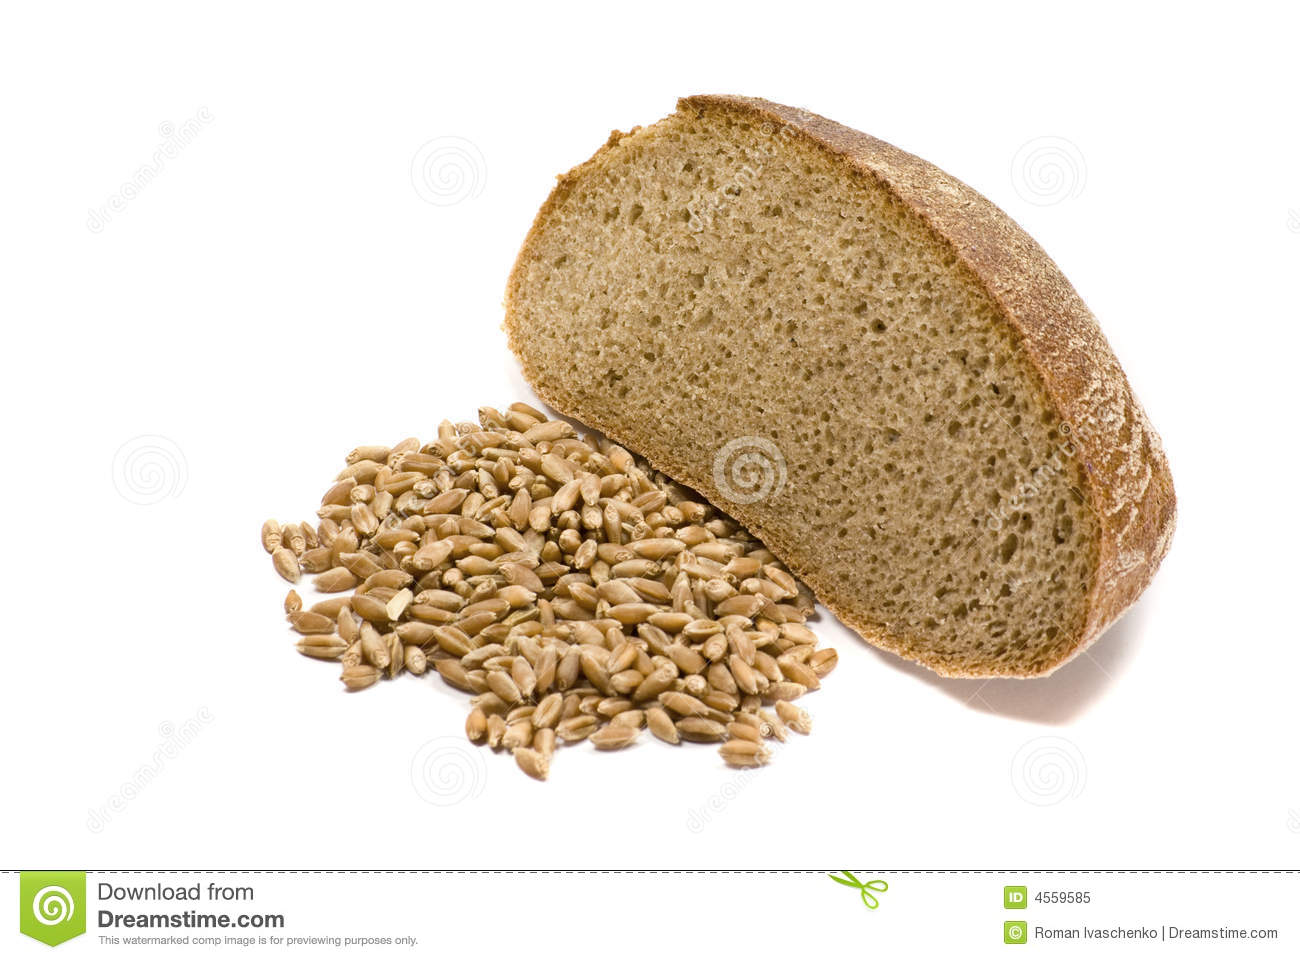 Barley Grains And The Piece Of Bread Royalty Free Stock Photo   Image